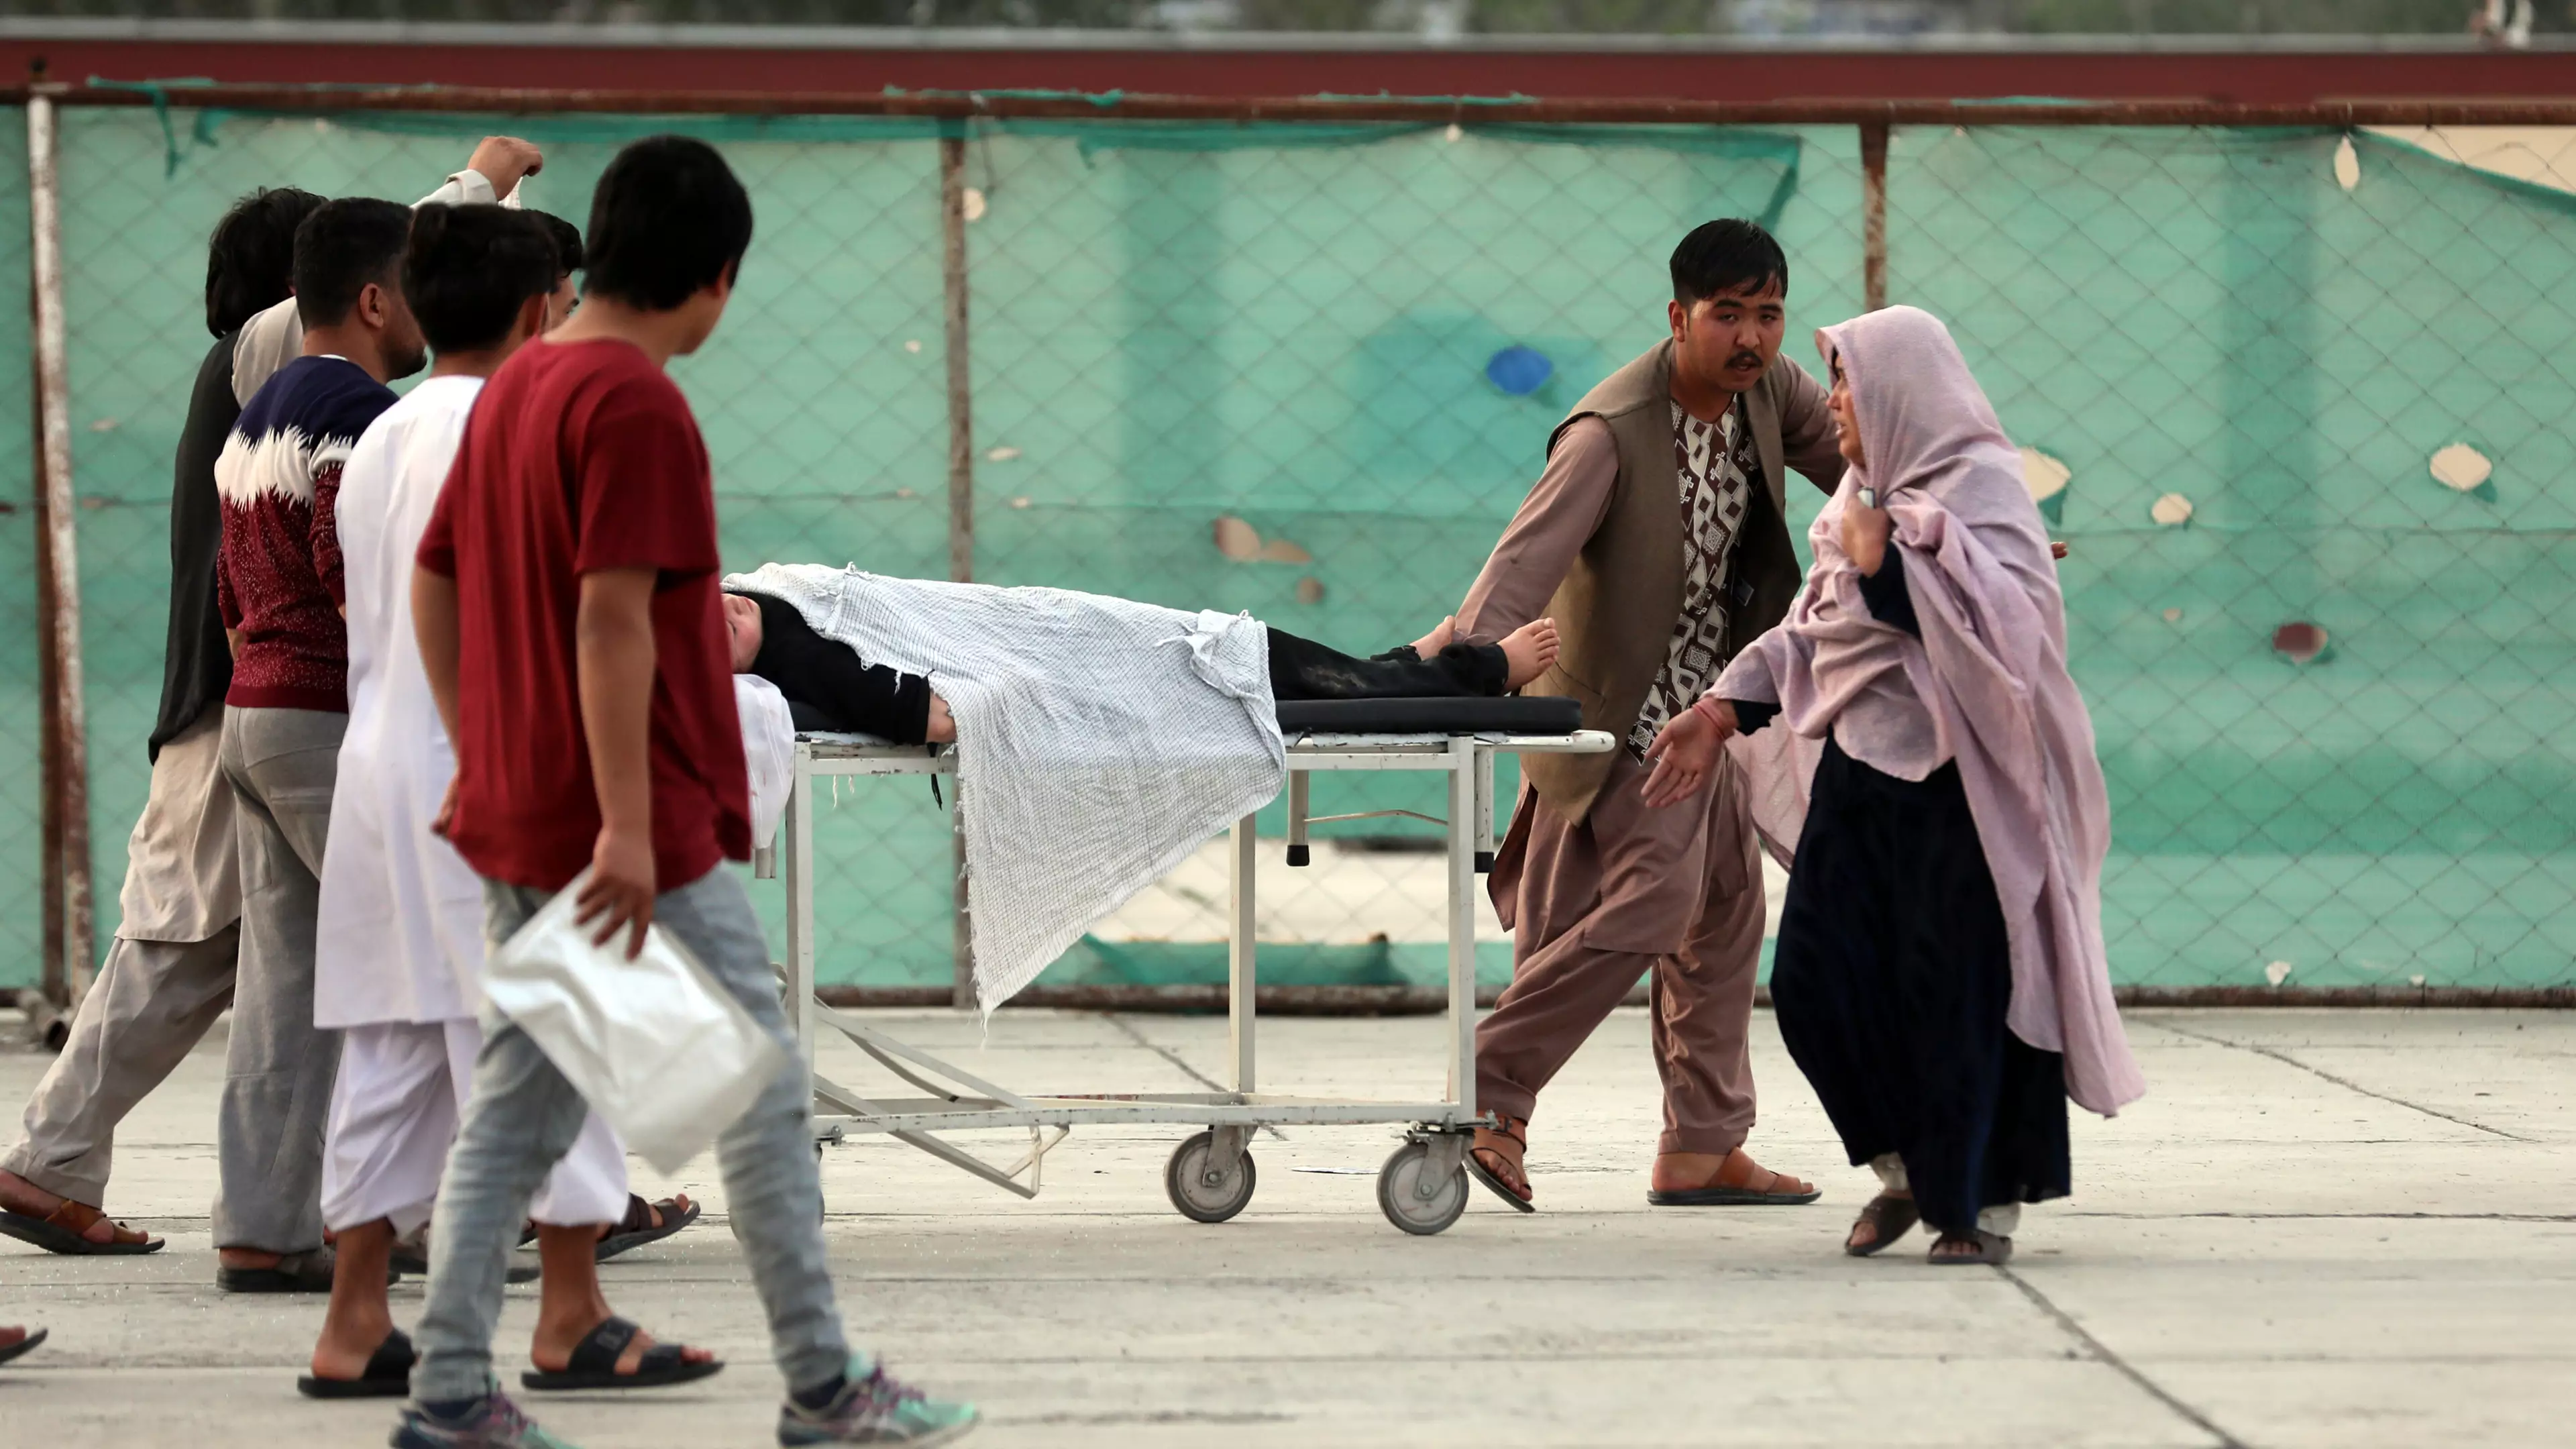 Nearly 70 People Dead After Bombs Explode Outside Afghan Girls School